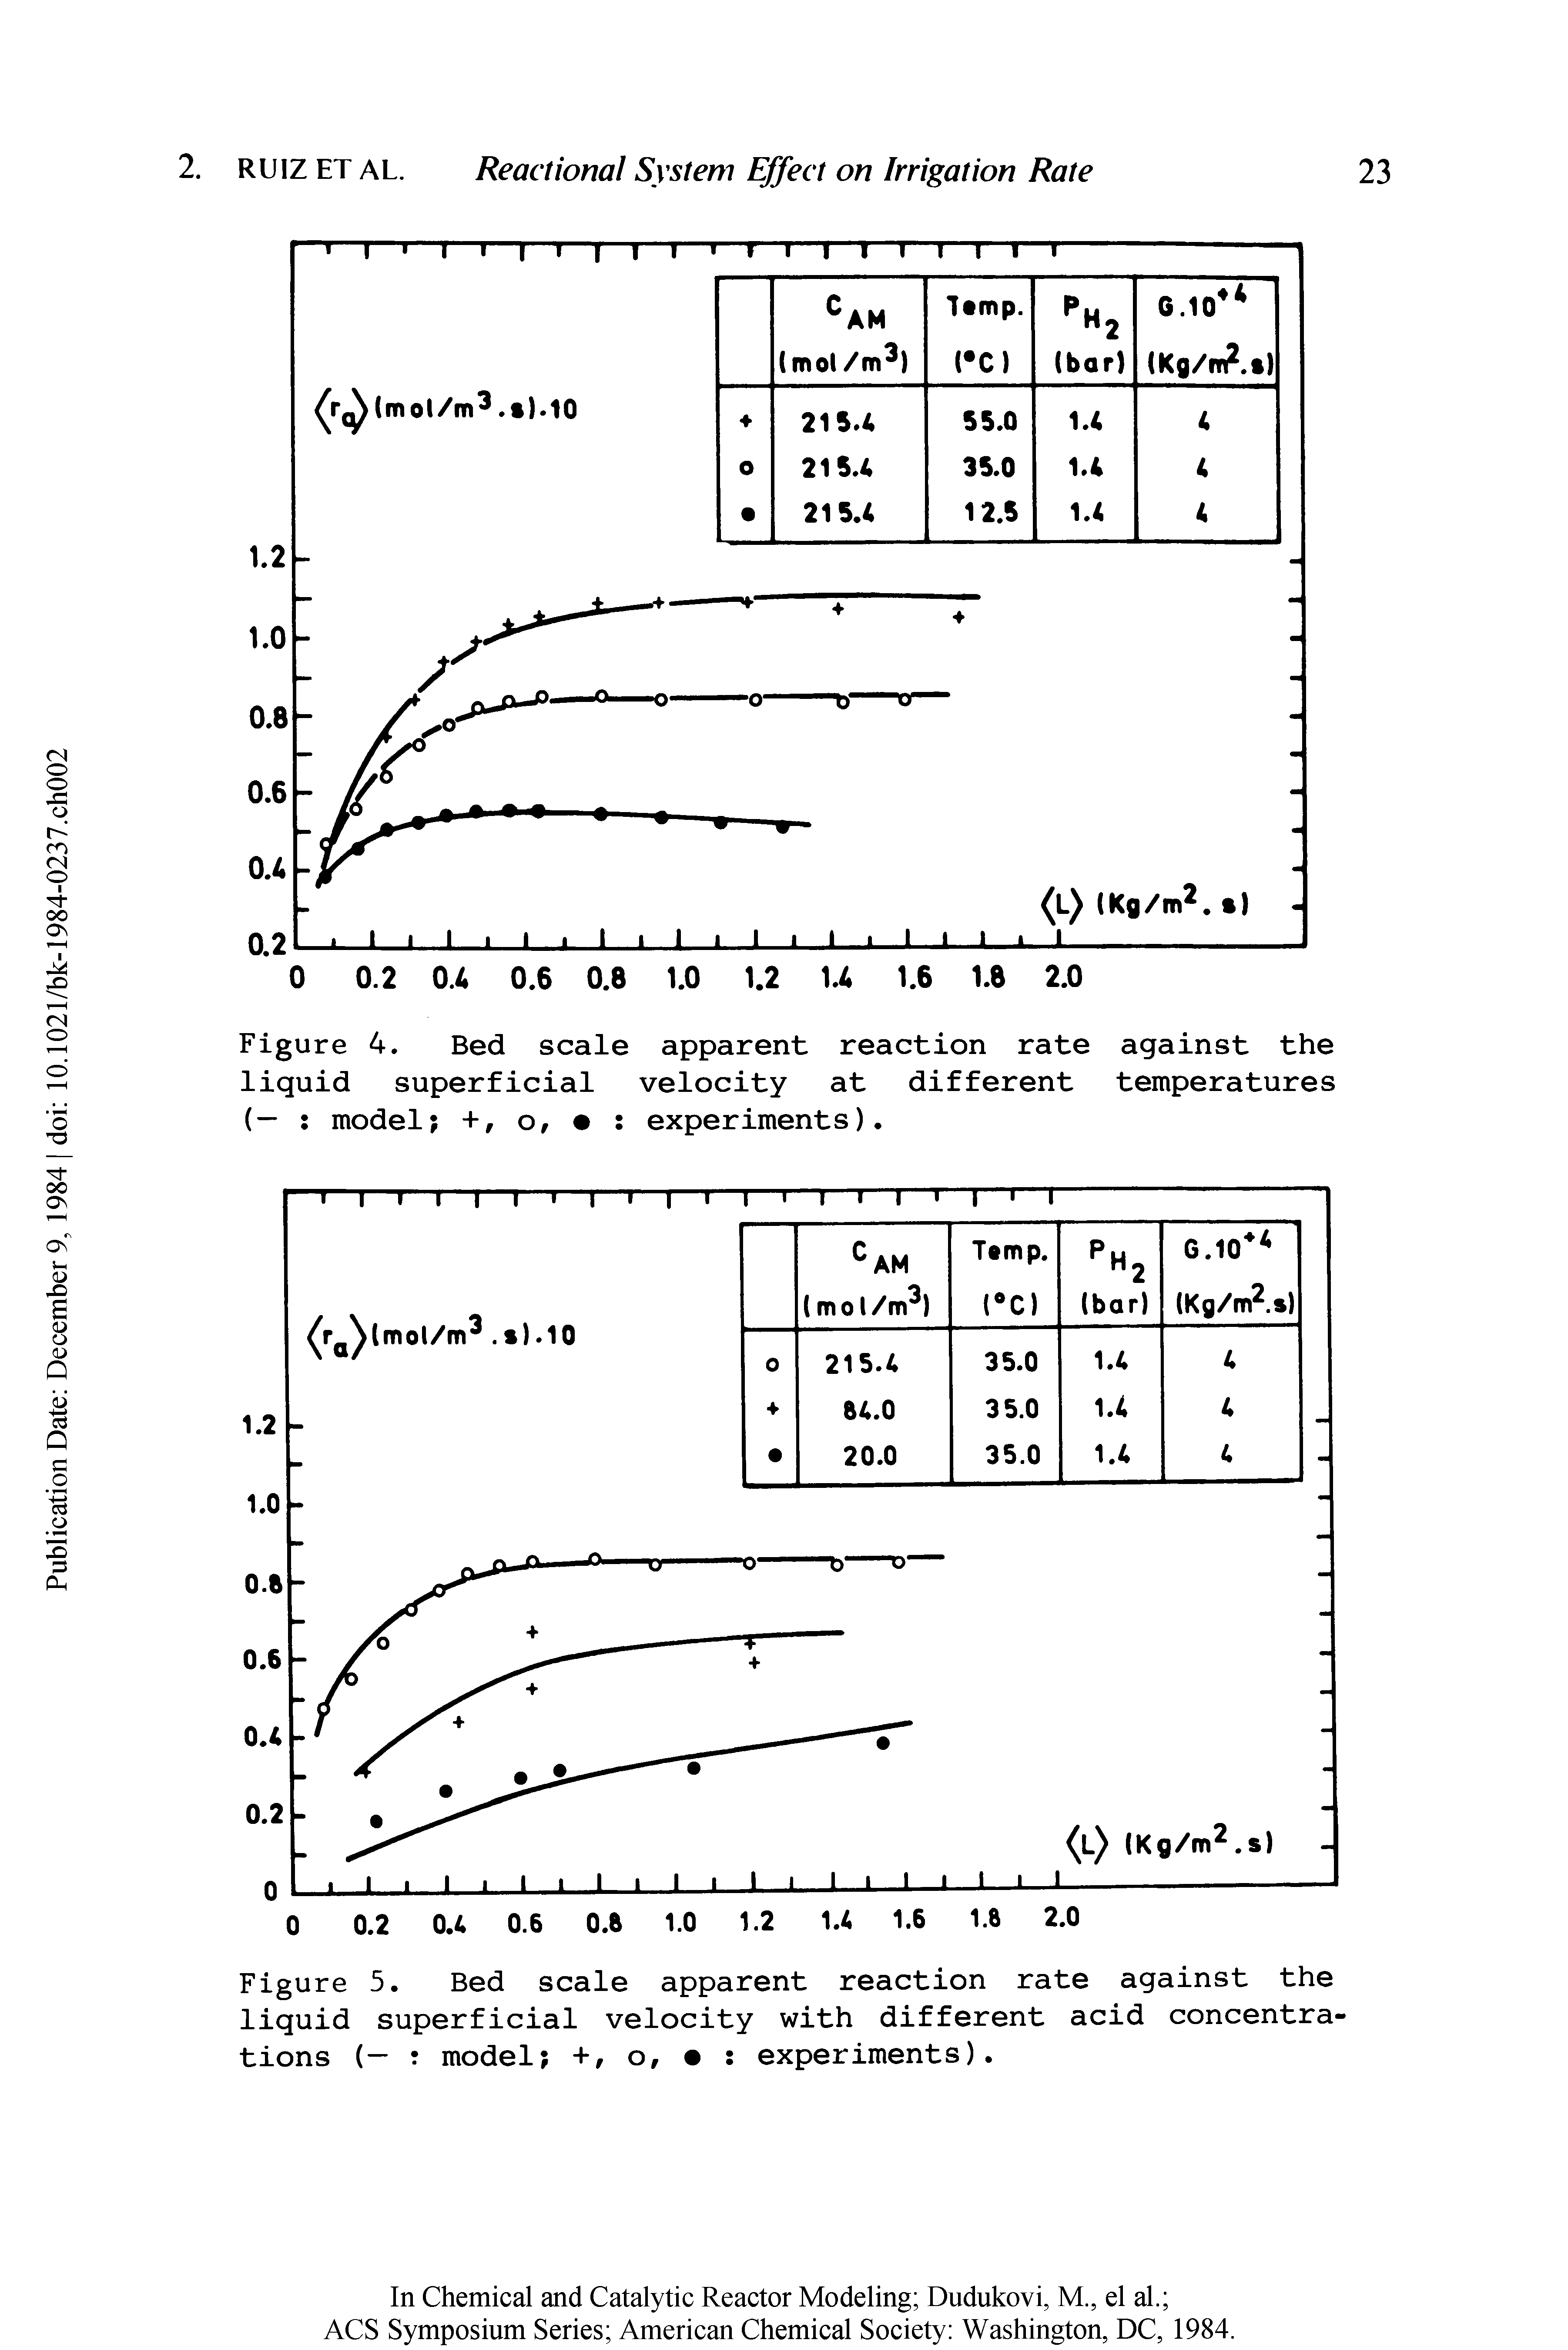 Figure 4. Bed scale apparent reaction rate against the liquid superficial velocity at different temperatures (— model +, o, s experiments).